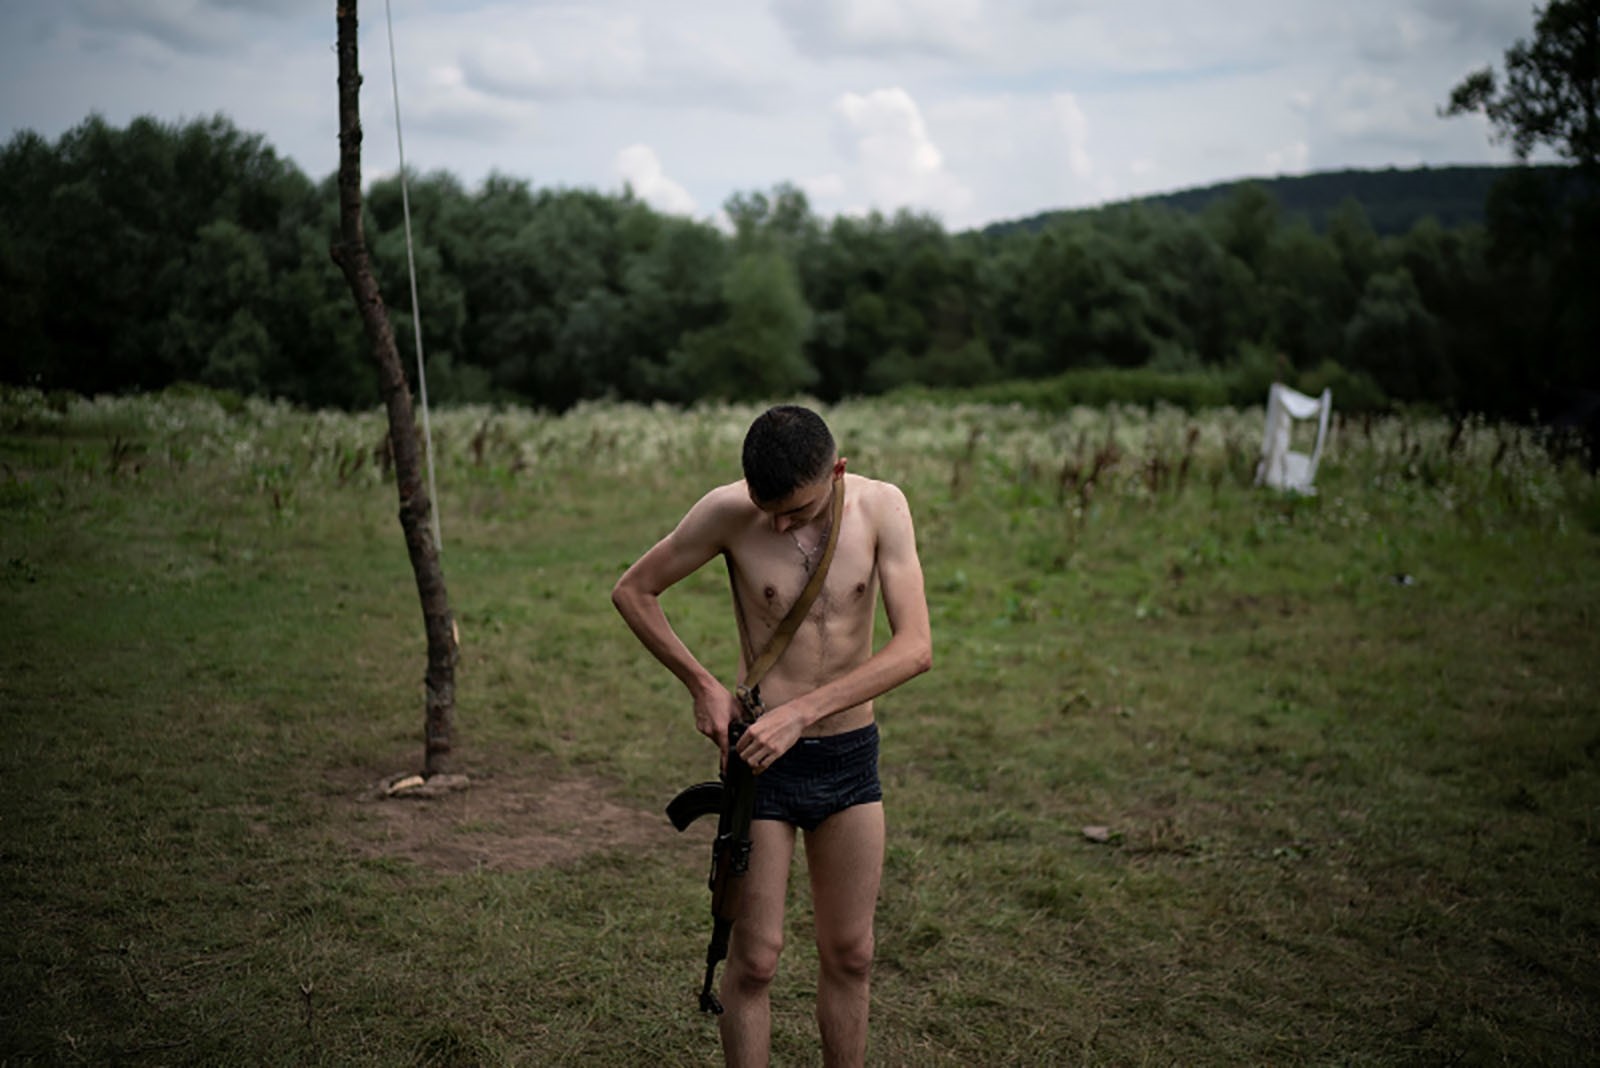 Mykhailo adjusts his AK-47 rifle after bathing in a river.